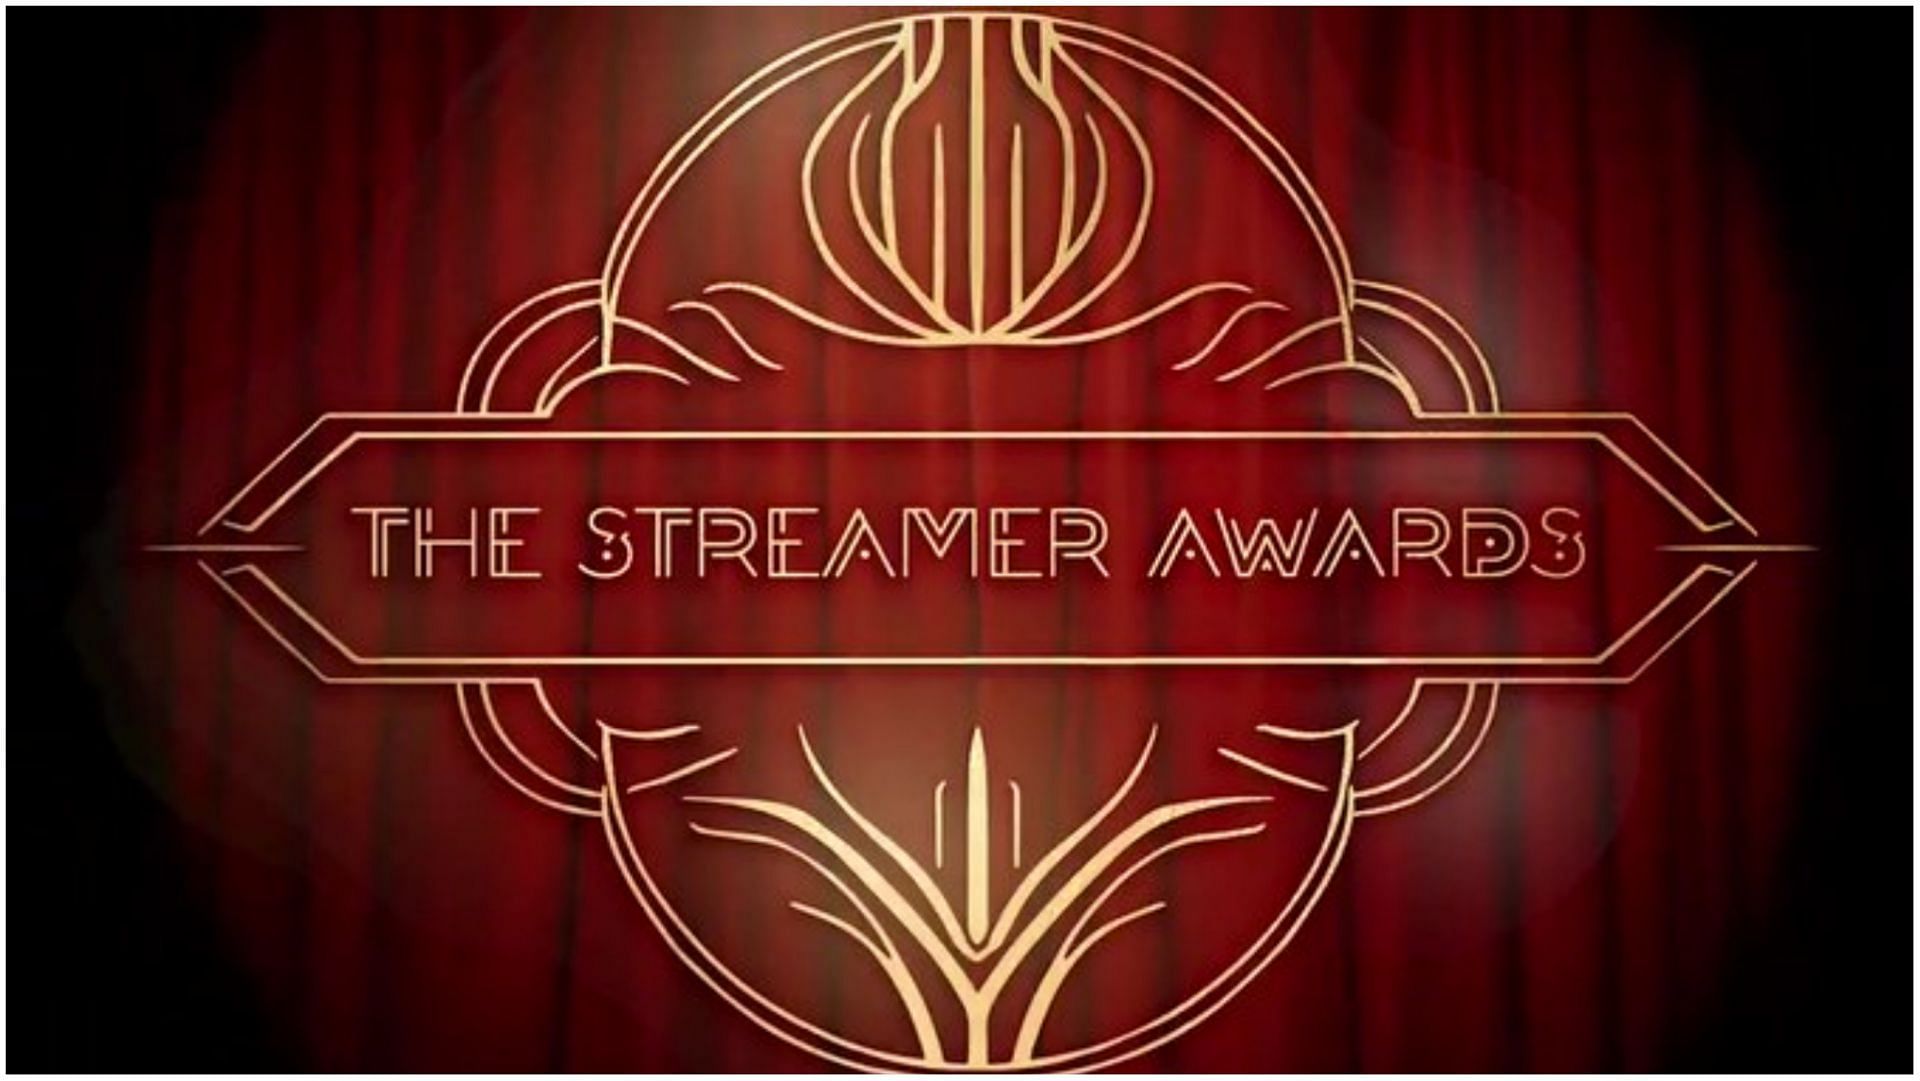 Fans can now vote for their favorite nominated streamers for the upcoming Streamer Awards (Image via Twitter)